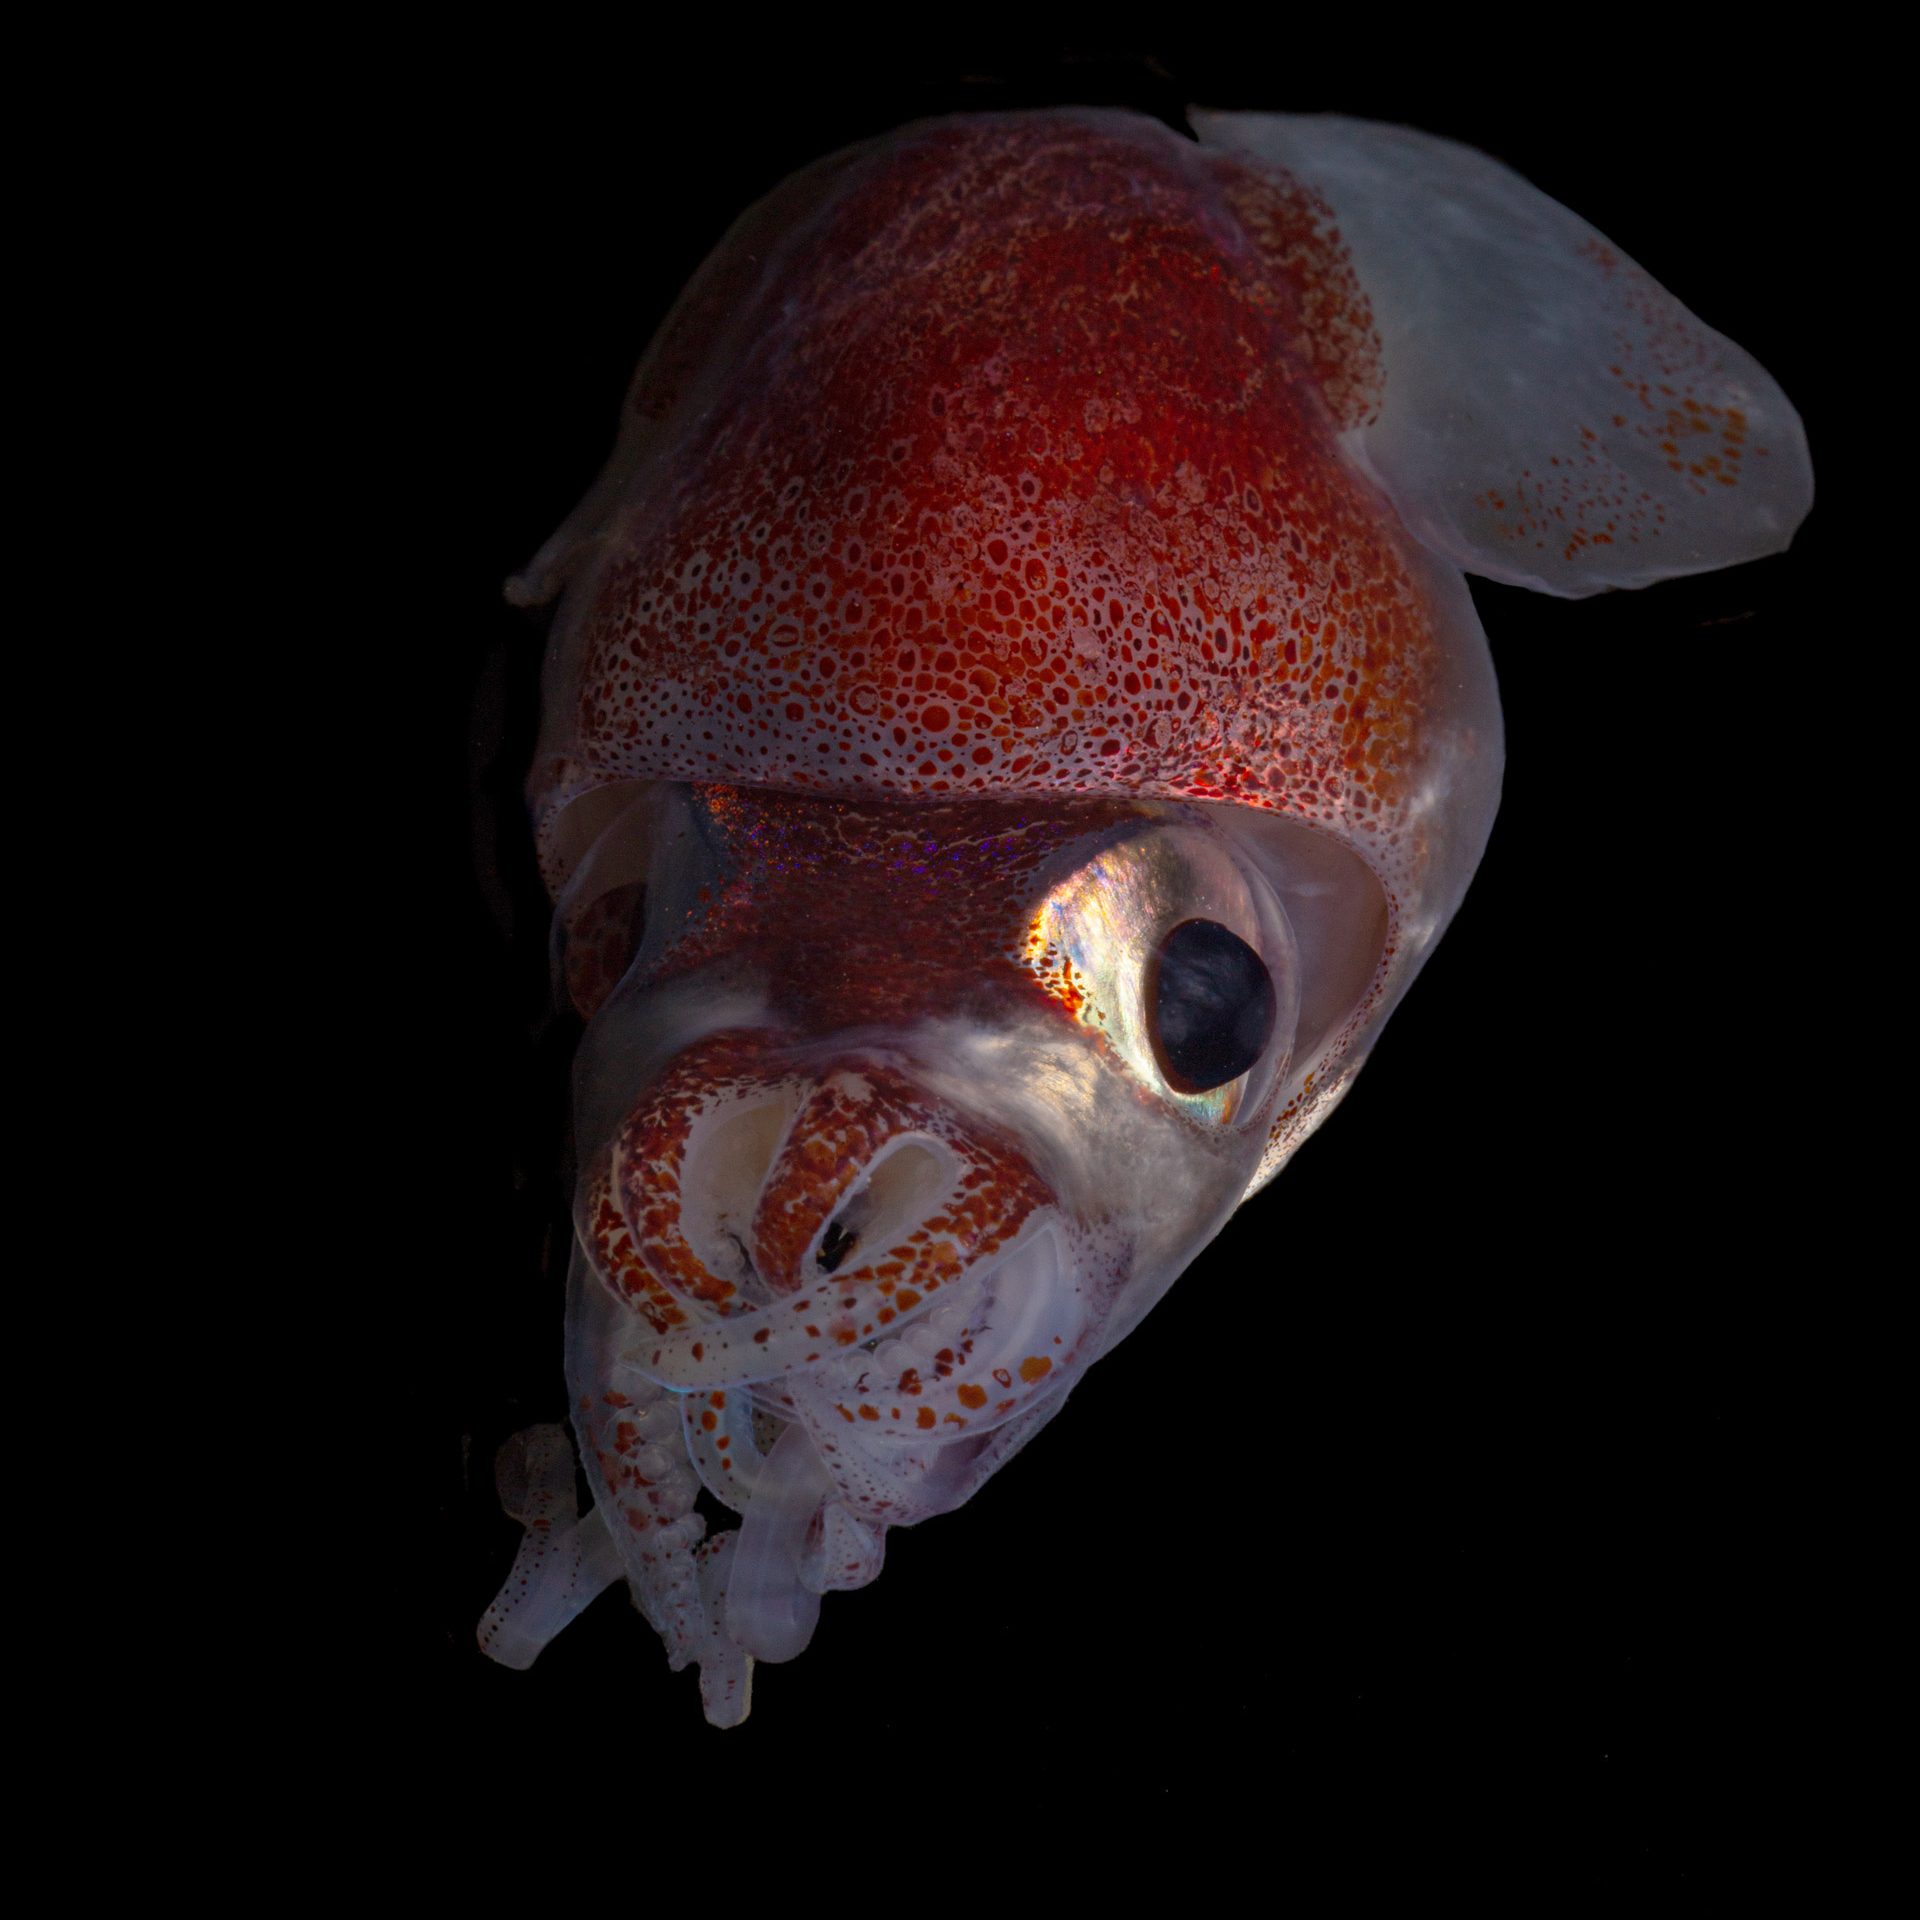 Bobtail squid (order Sepiolida) are a group of cephalopods closely related to cuttlefish. Bobtail squid tend to have a rounder mantle than cuttlefish and have no cuttlebone. Photo by Paul Caiger, Woods Hole Oceanographic Institution. 